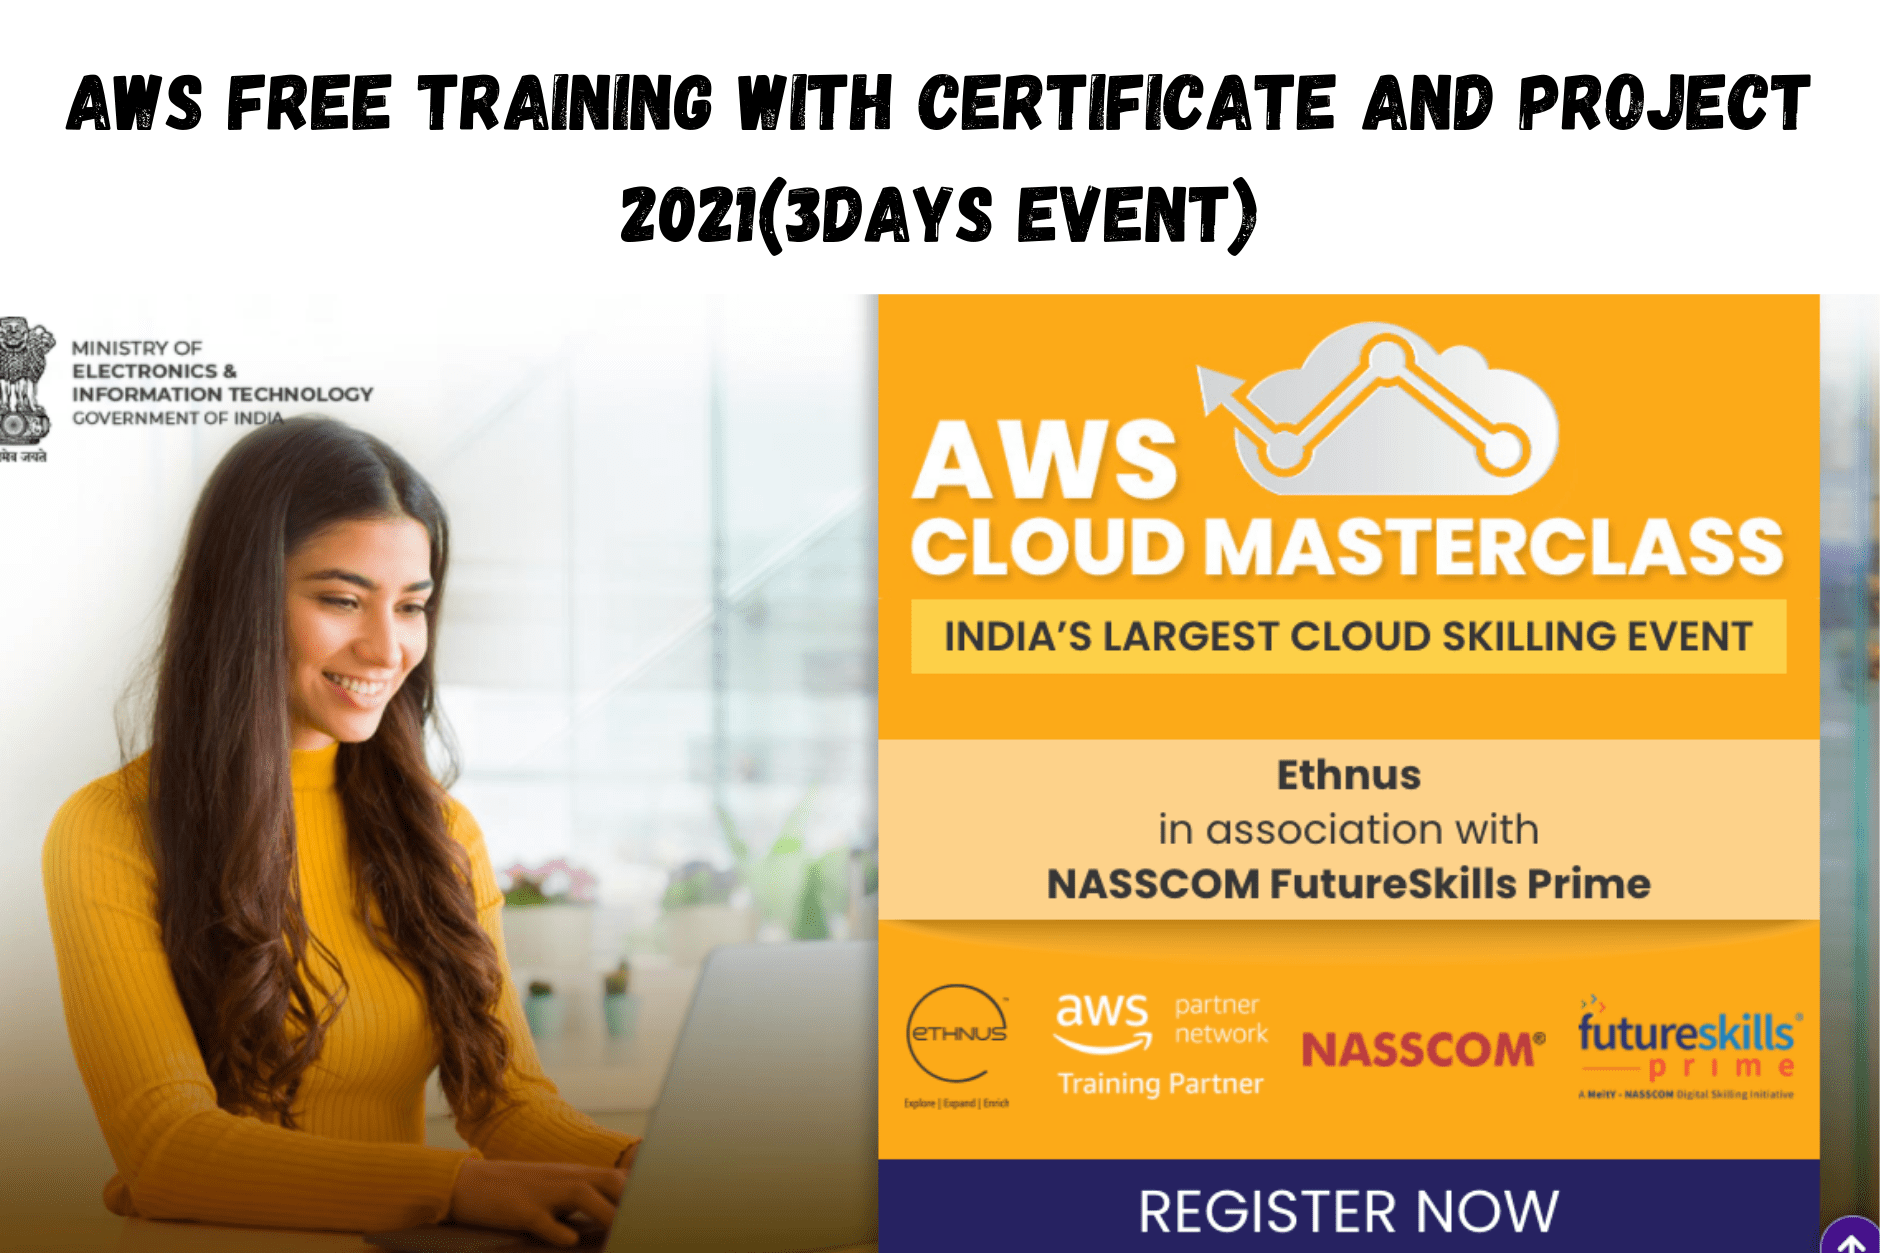 AWS Free training with certificate and Project 2021(3days event)